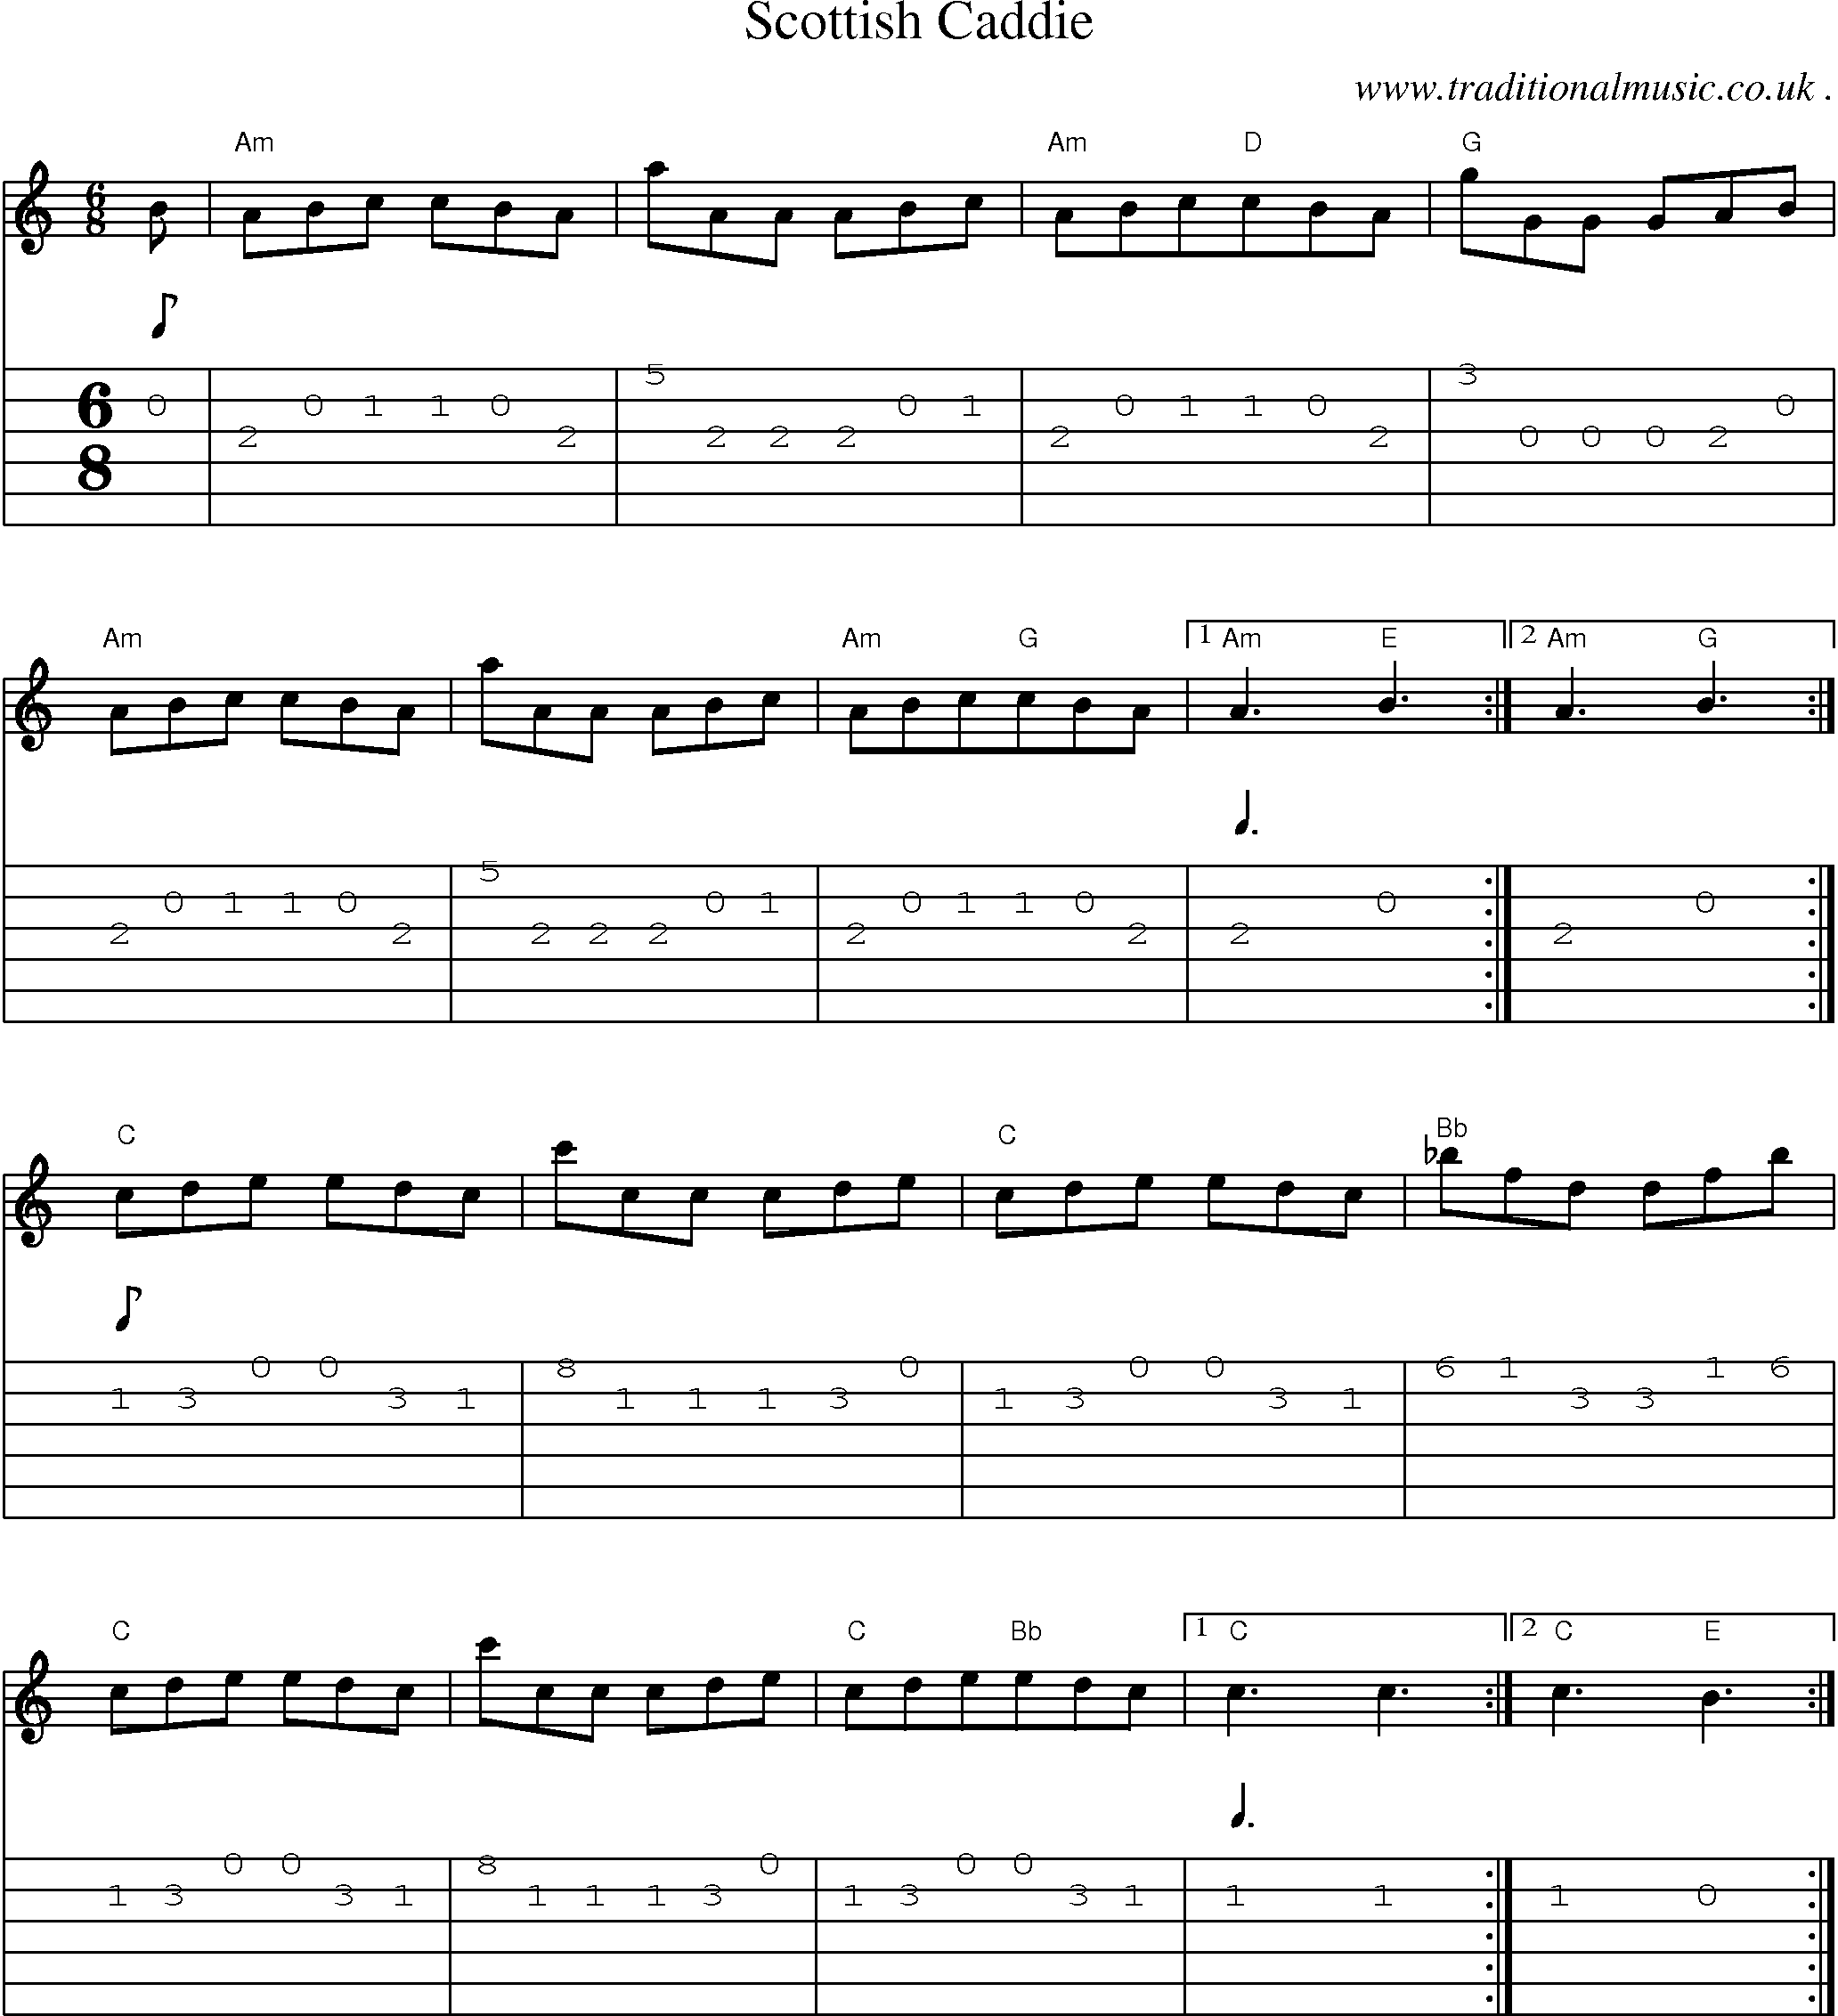 Sheet-Music and Guitar Tabs for Scottish Caddie